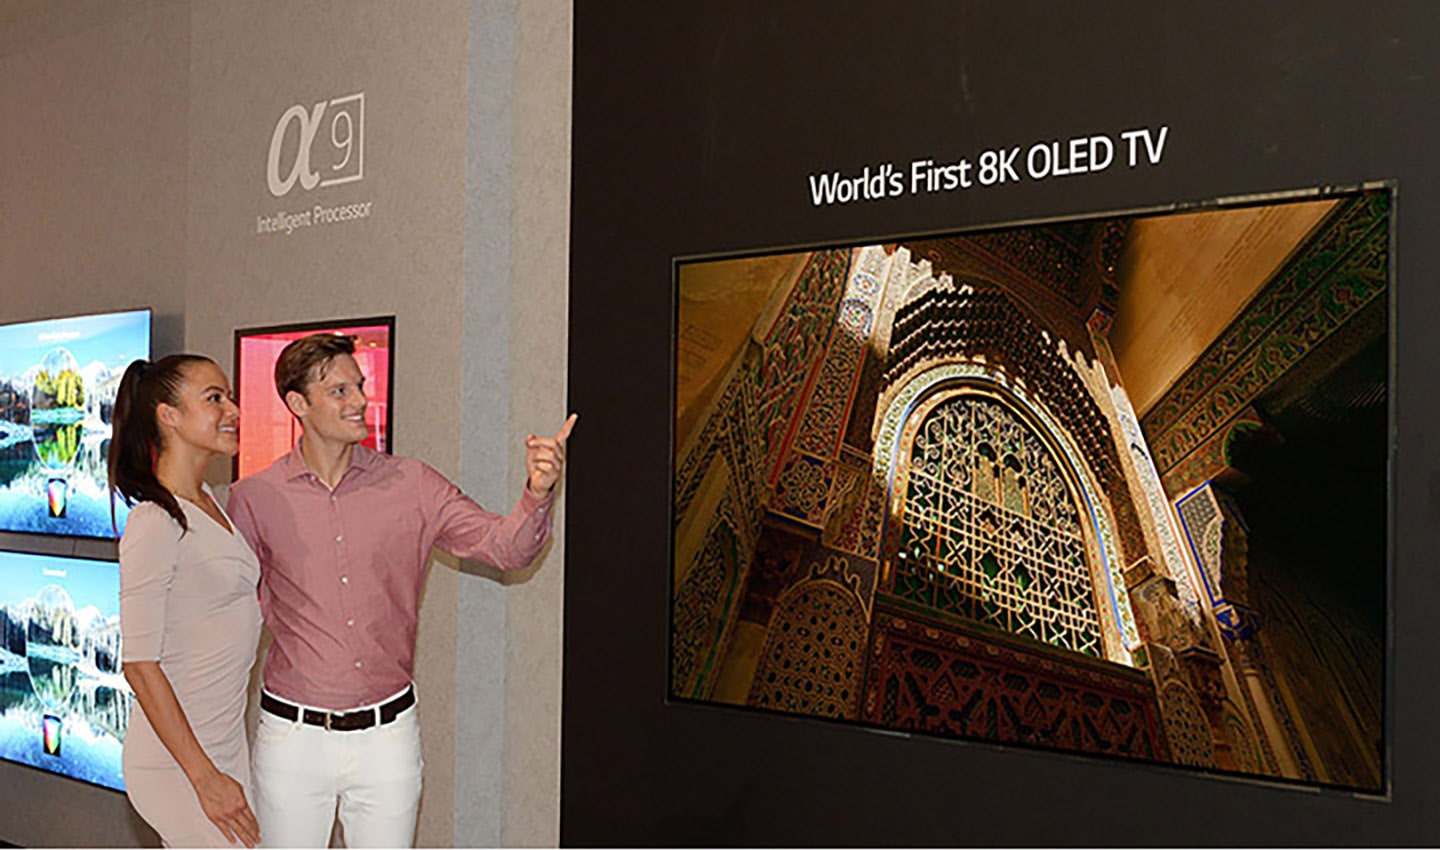 Another view of the World’s First 8K OLED TV with A9 Intelligent Processor display at IFA 2018, with a male and female model standing on the side pointing to the screen